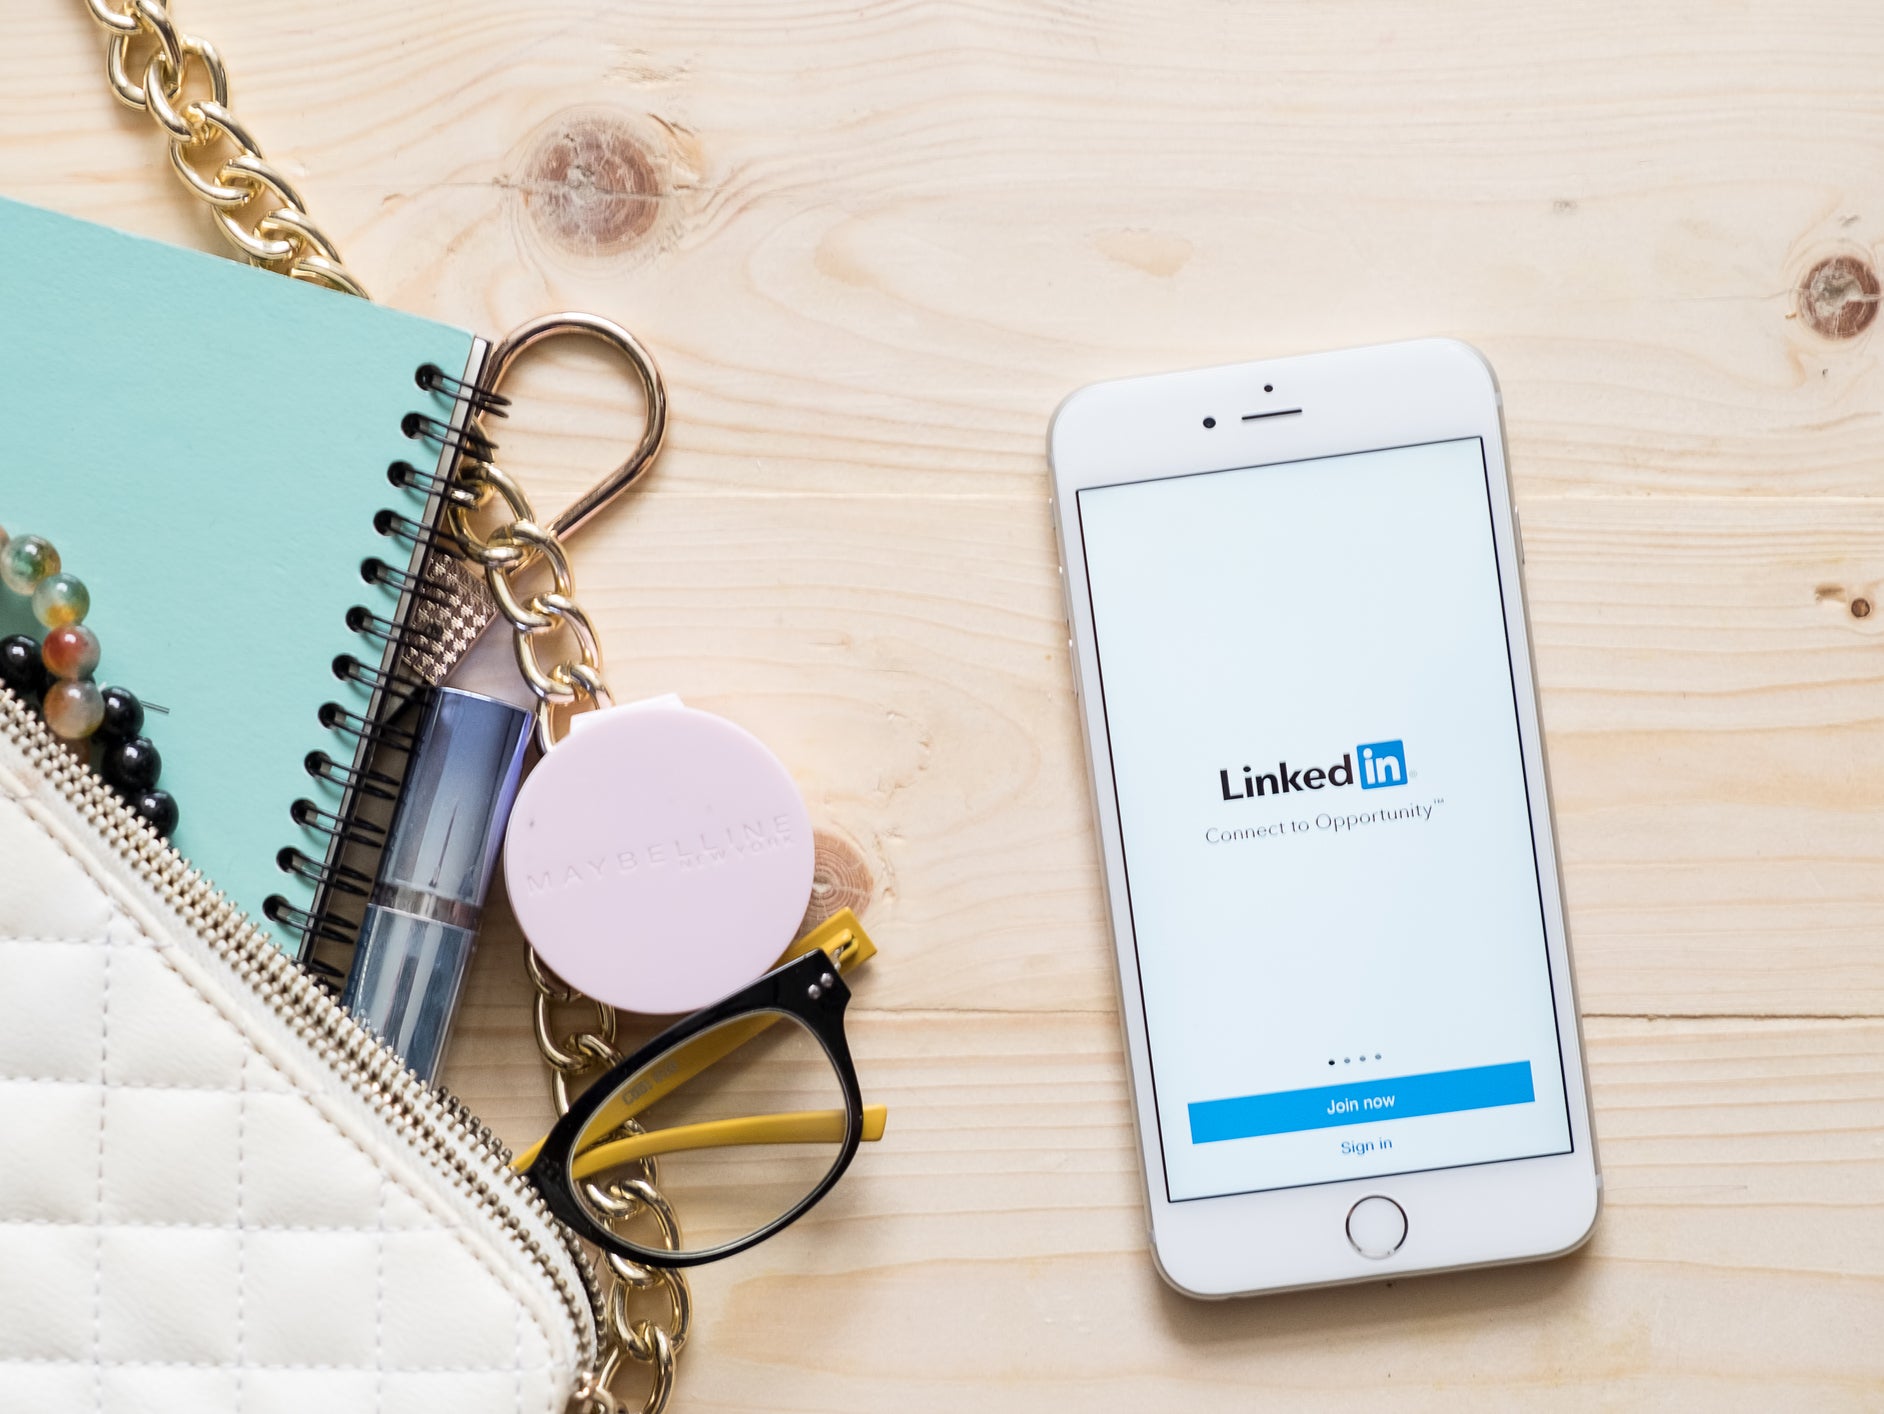 LinkedIn has heavily invested in LinkedIn Pulse, a free-to-use service that provides publishing tools to rival those of Wordpress and Medium